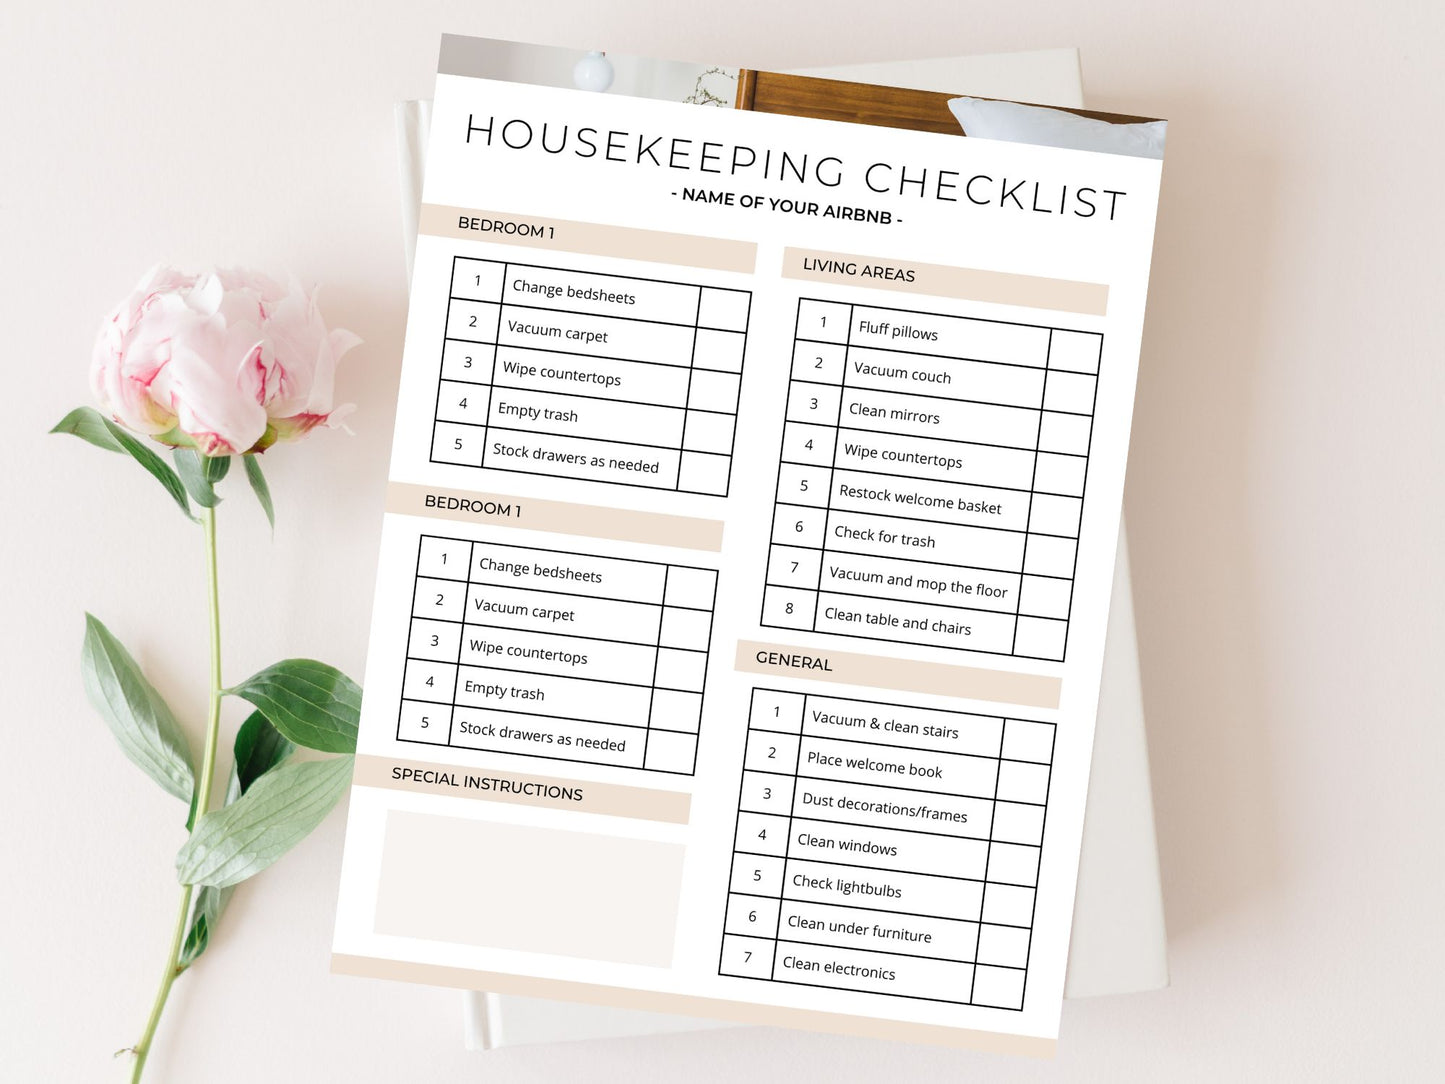 Airbnb Housekeeping Checklist - Comprehensive and editable template for maintaining cleanliness in your vacation rental property.